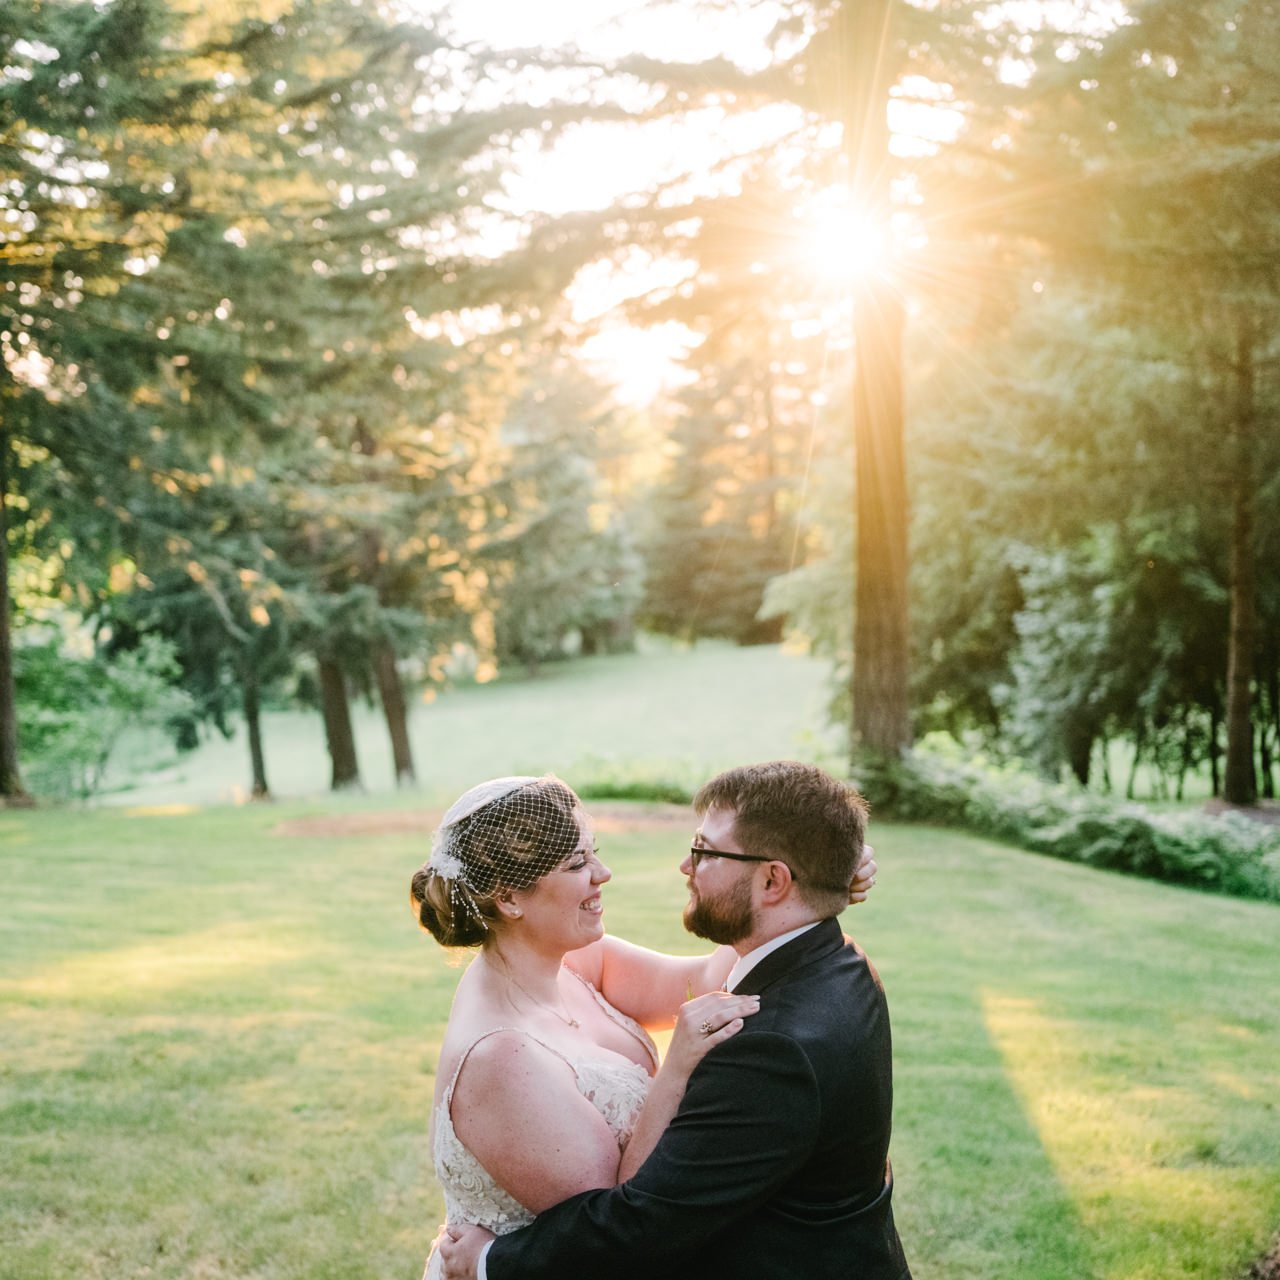  Square photo of bride and groom laughing in sunlight field and tall fir trees 